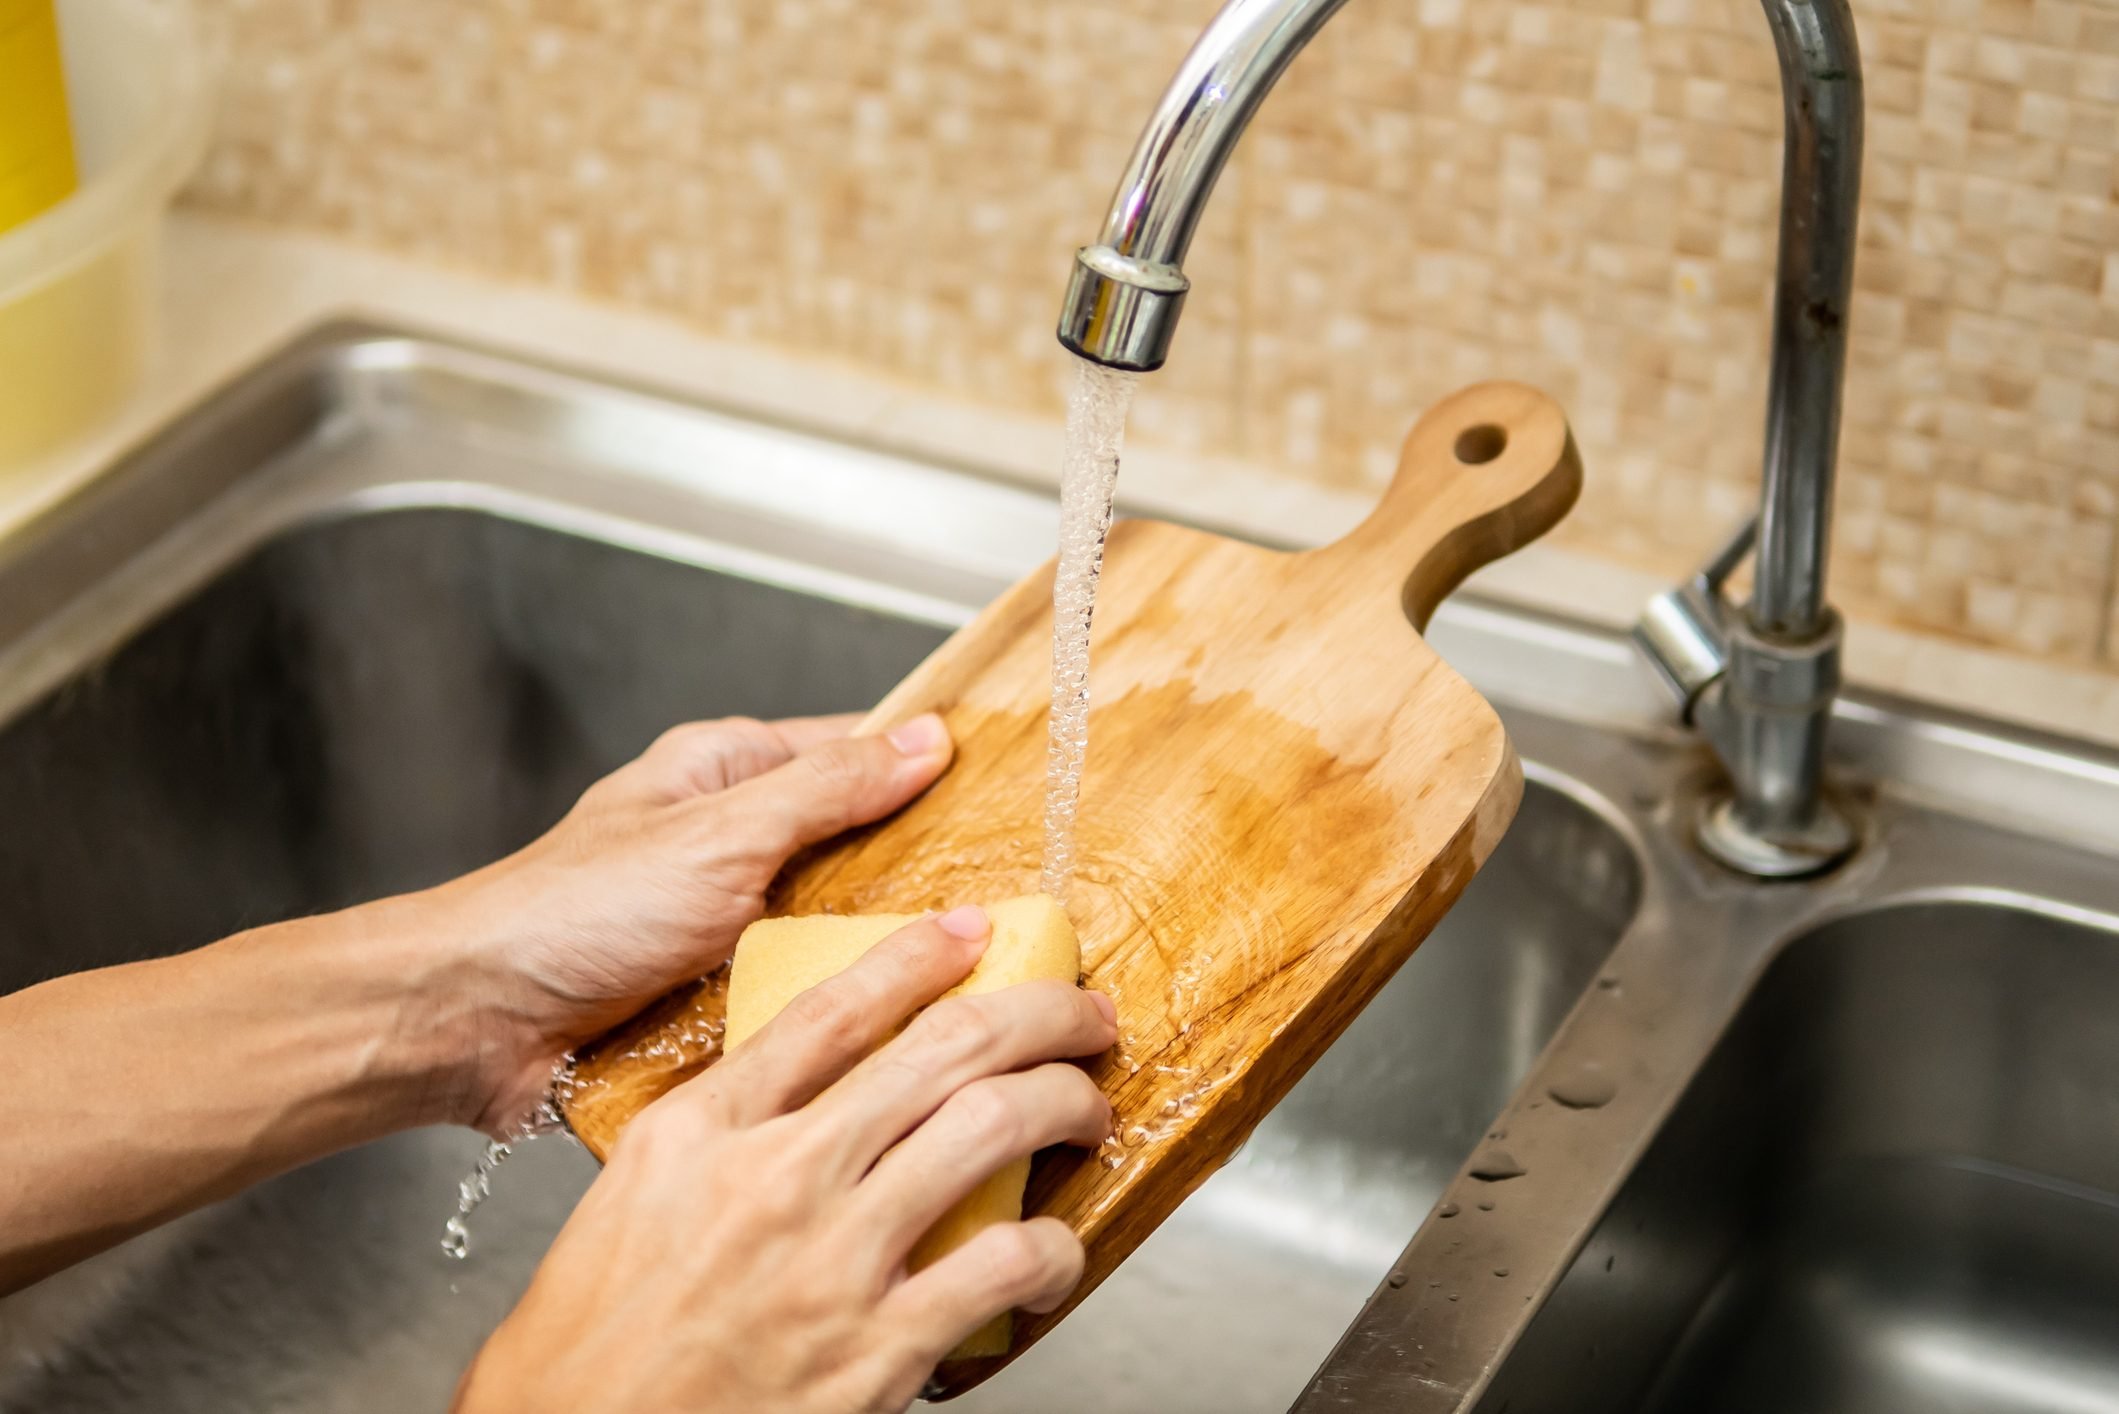 How to Clean a Wooden Cutting Board—and Sanitize It Too!